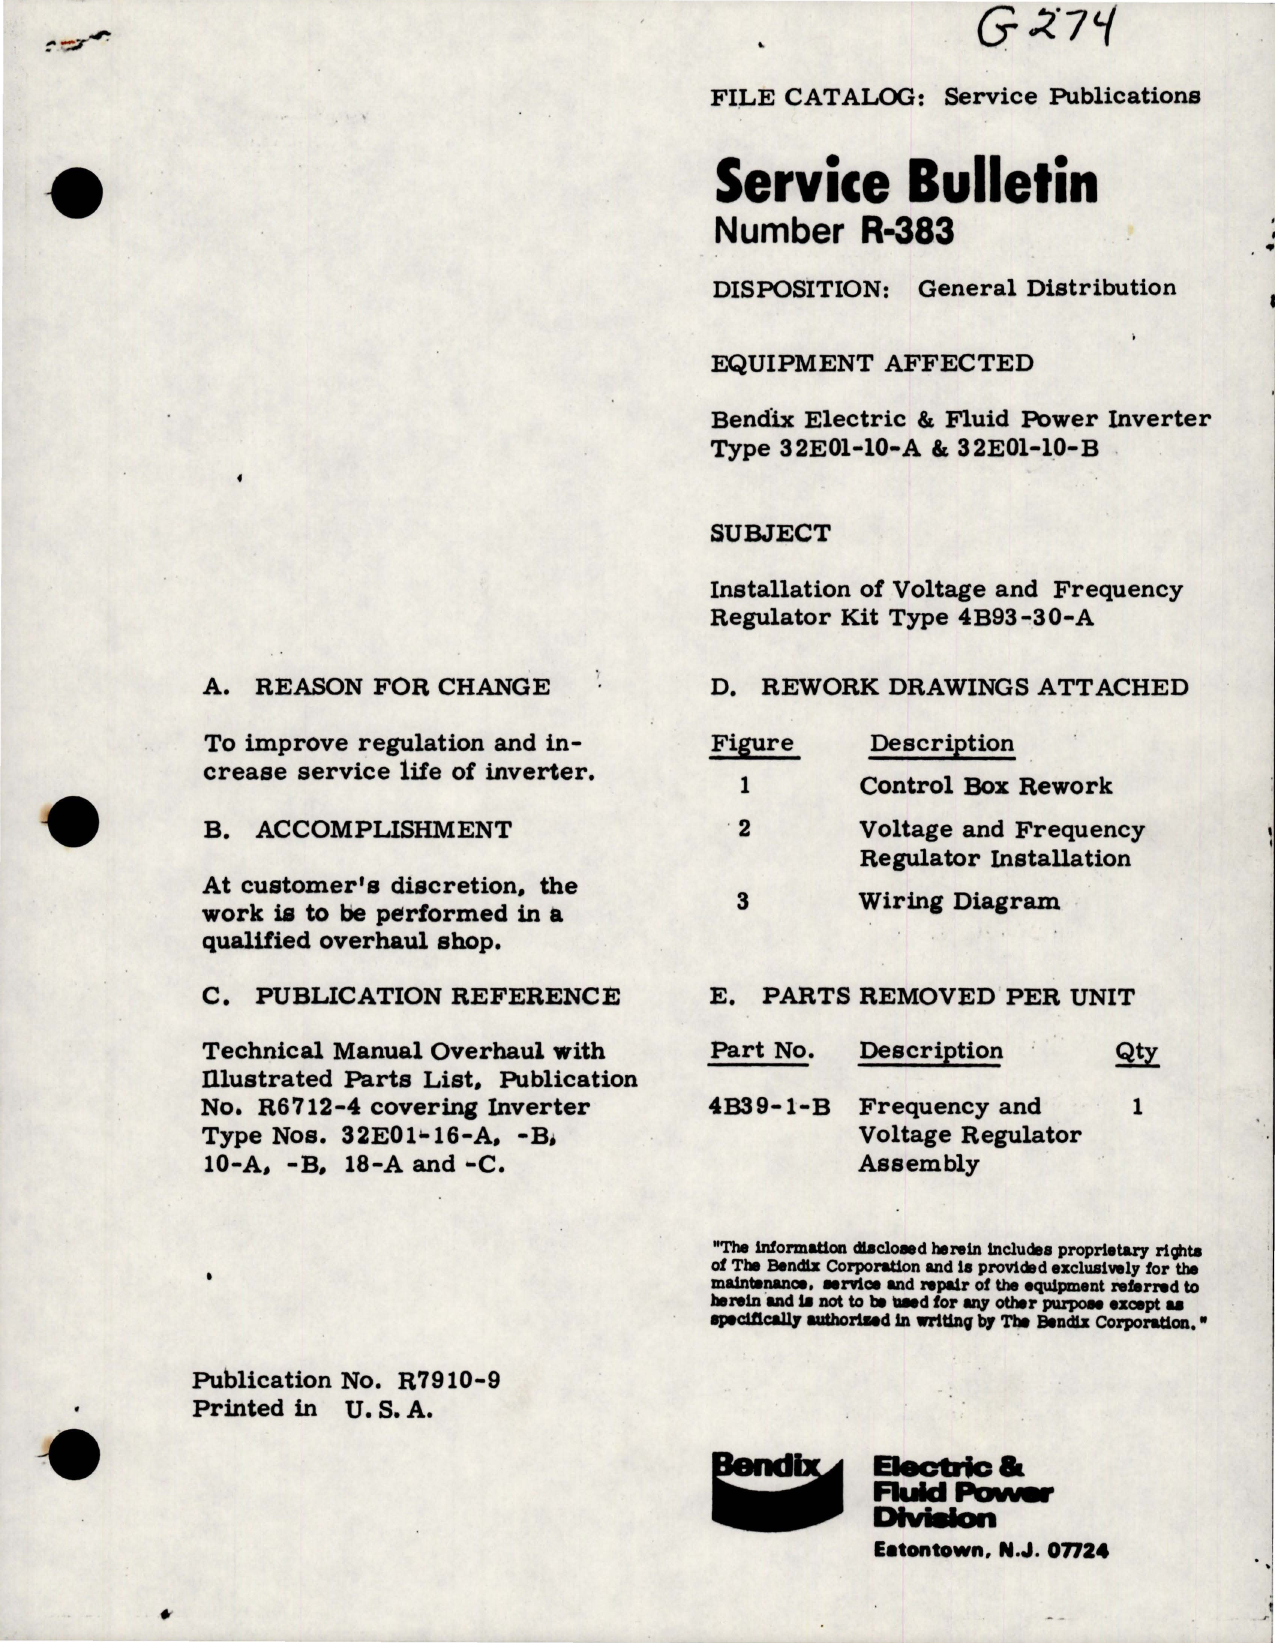 Sample page 1 from AirCorps Library document: Service Bulletin No. R-383, Installation of Voltage and Frequency Regulator Kit - Type 4B93-30-A 